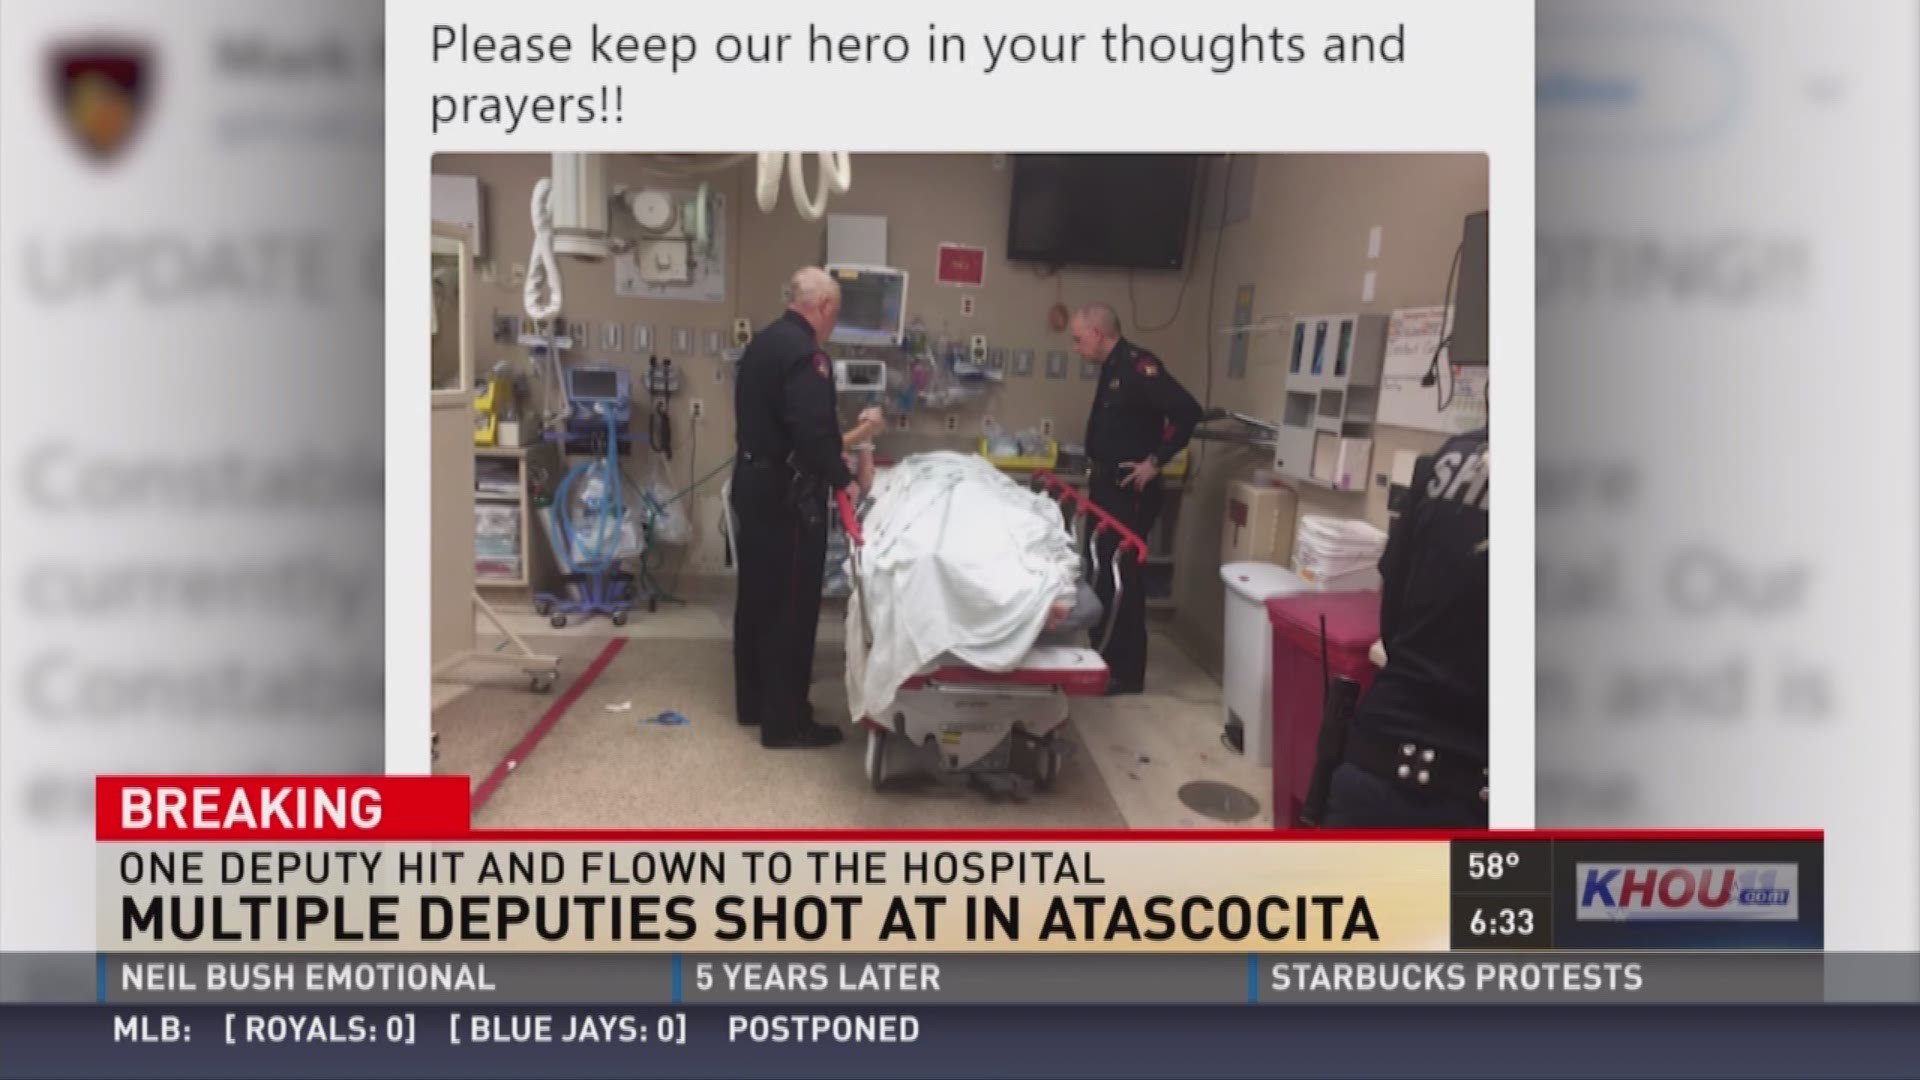 A deputy constable was wounded and two others were injured after exchanging gunfire with a suspect after responding to a disturbance in Atascocita early Tuesday.